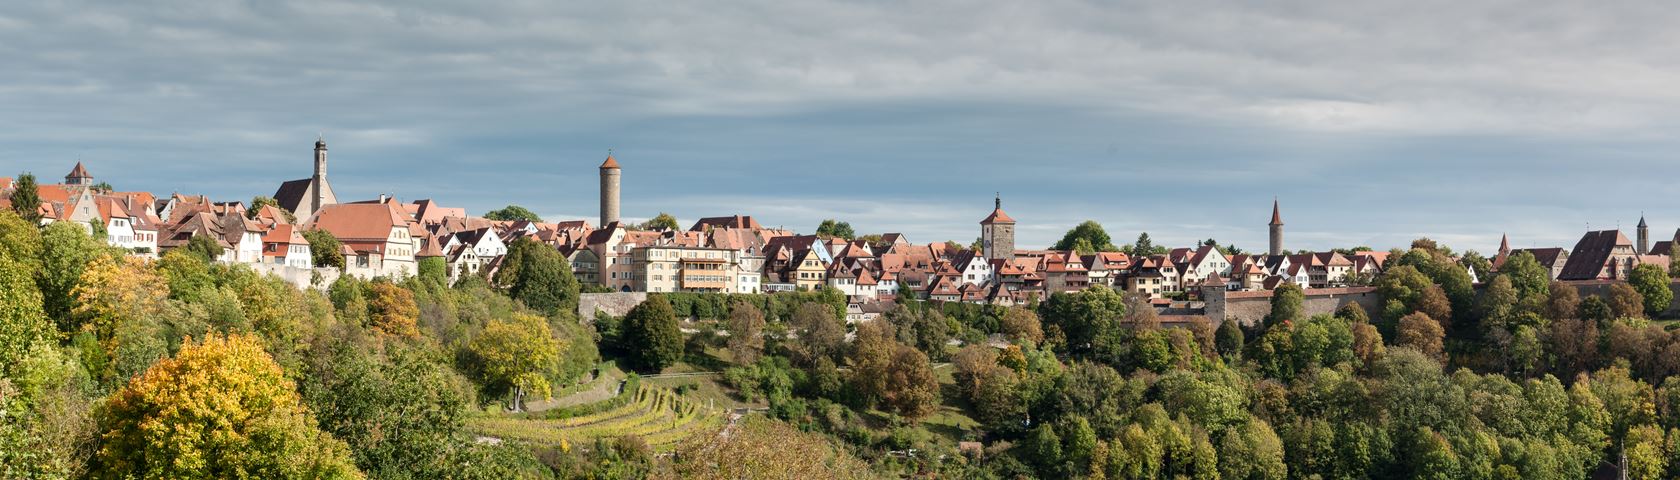 Rothenburg Ob Der Tauber Image Wallpaperfusion By Binary